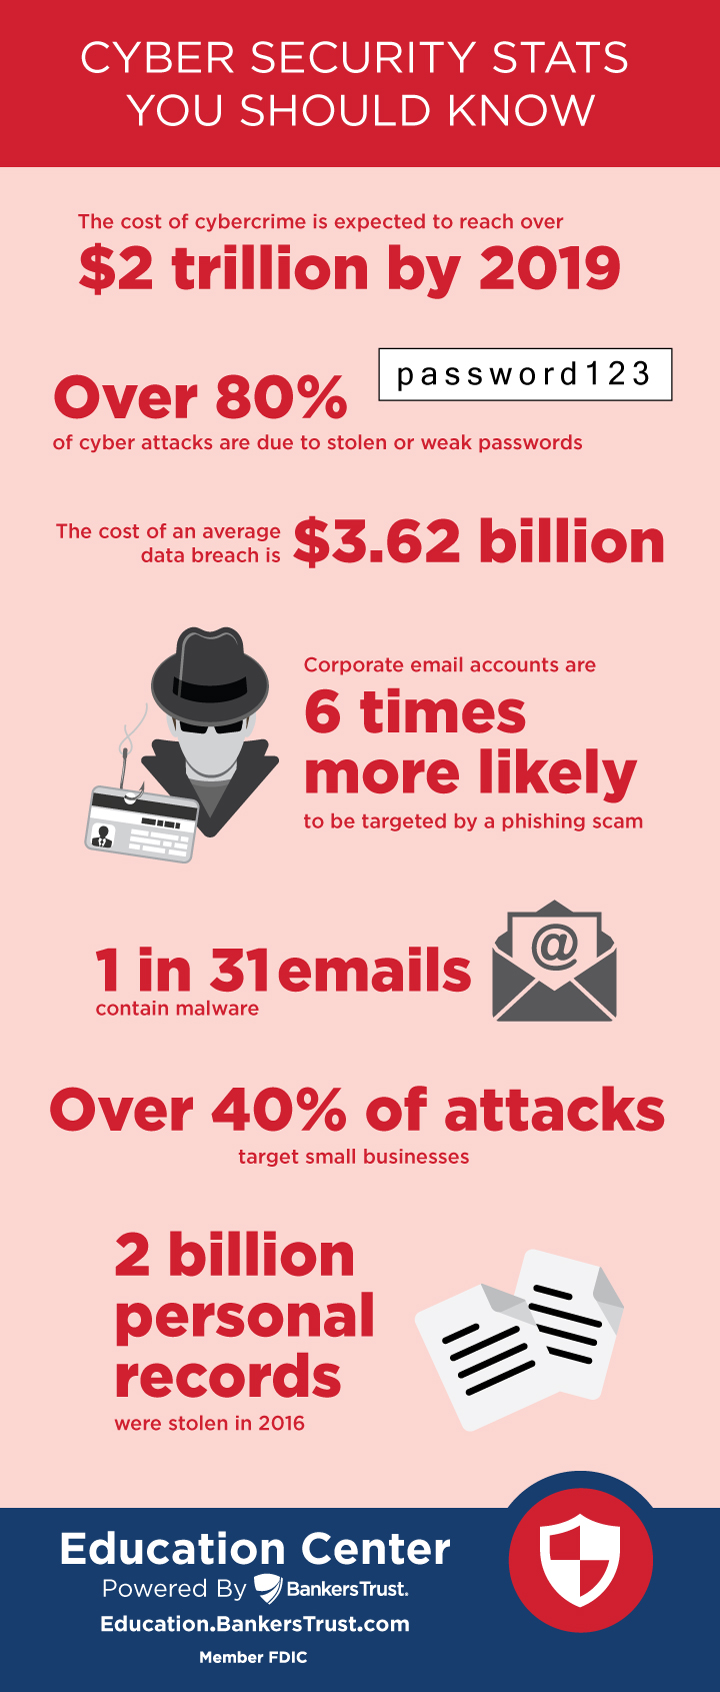 Cyber security stats you should know infographic with cybercrime statistics